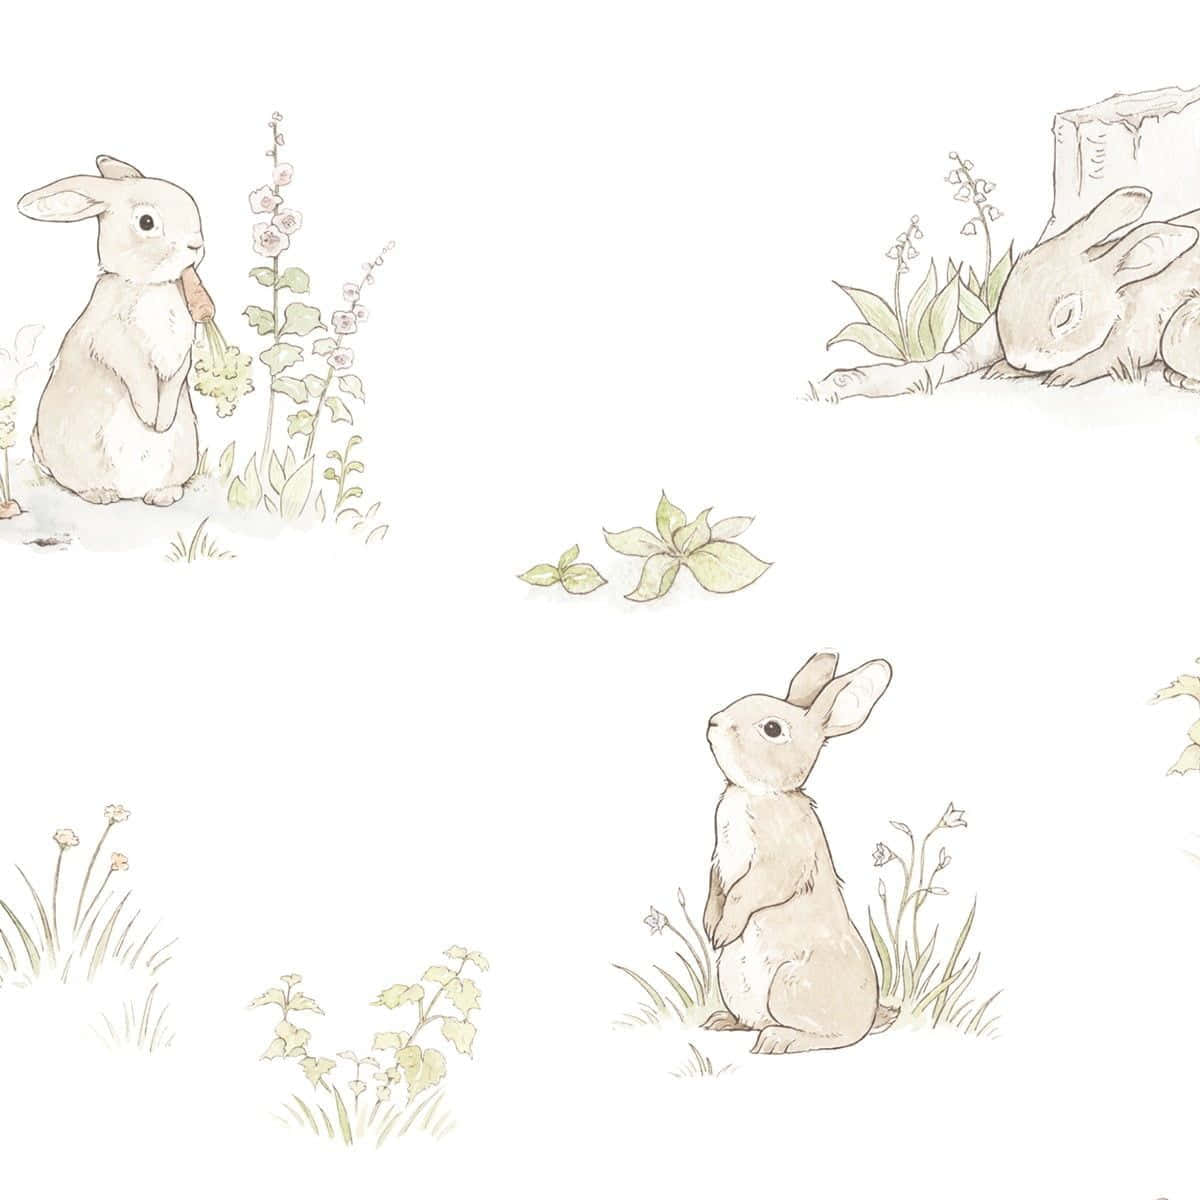 A Collection Of Rabbits In The Grass